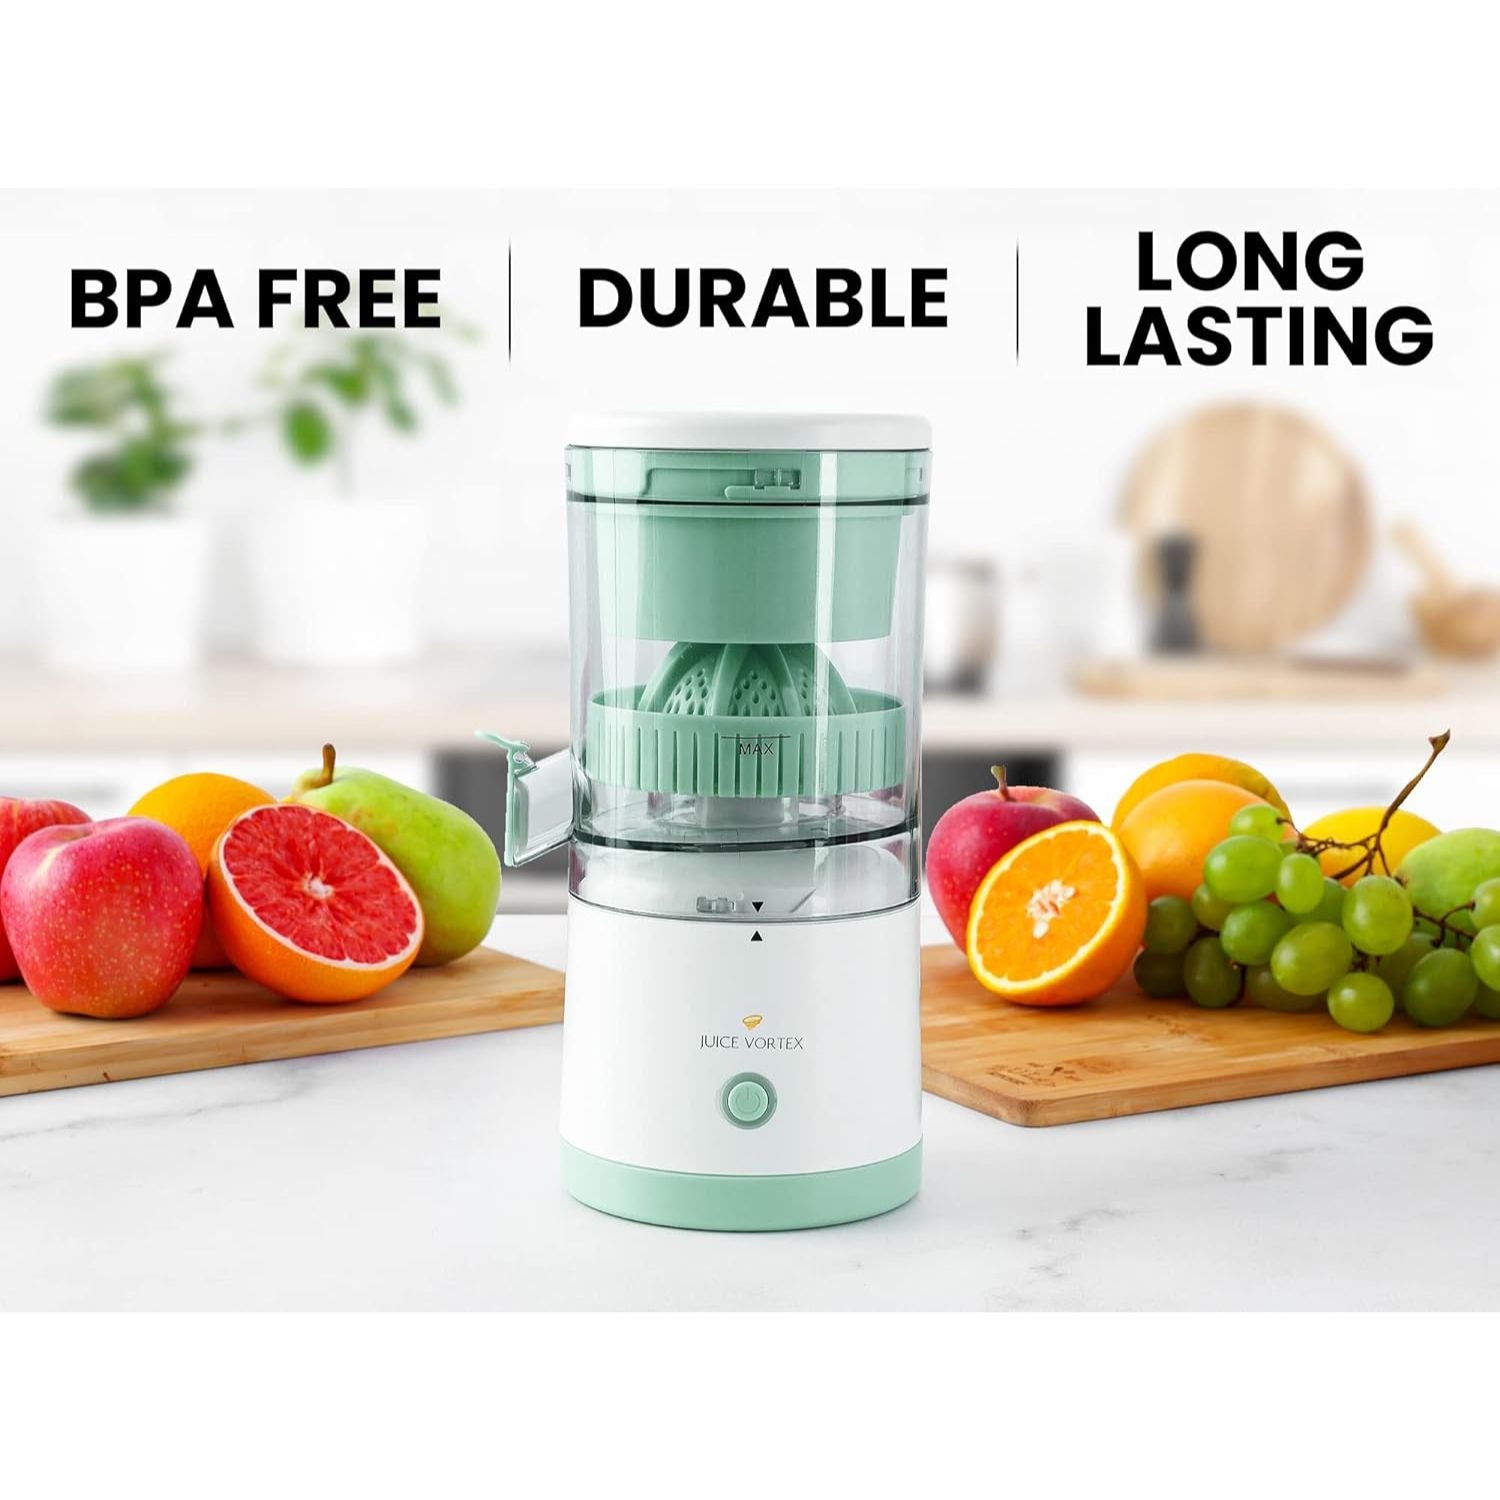 Dusenho Portable Rechargeable USB Electric Citrus Juicer New In Box